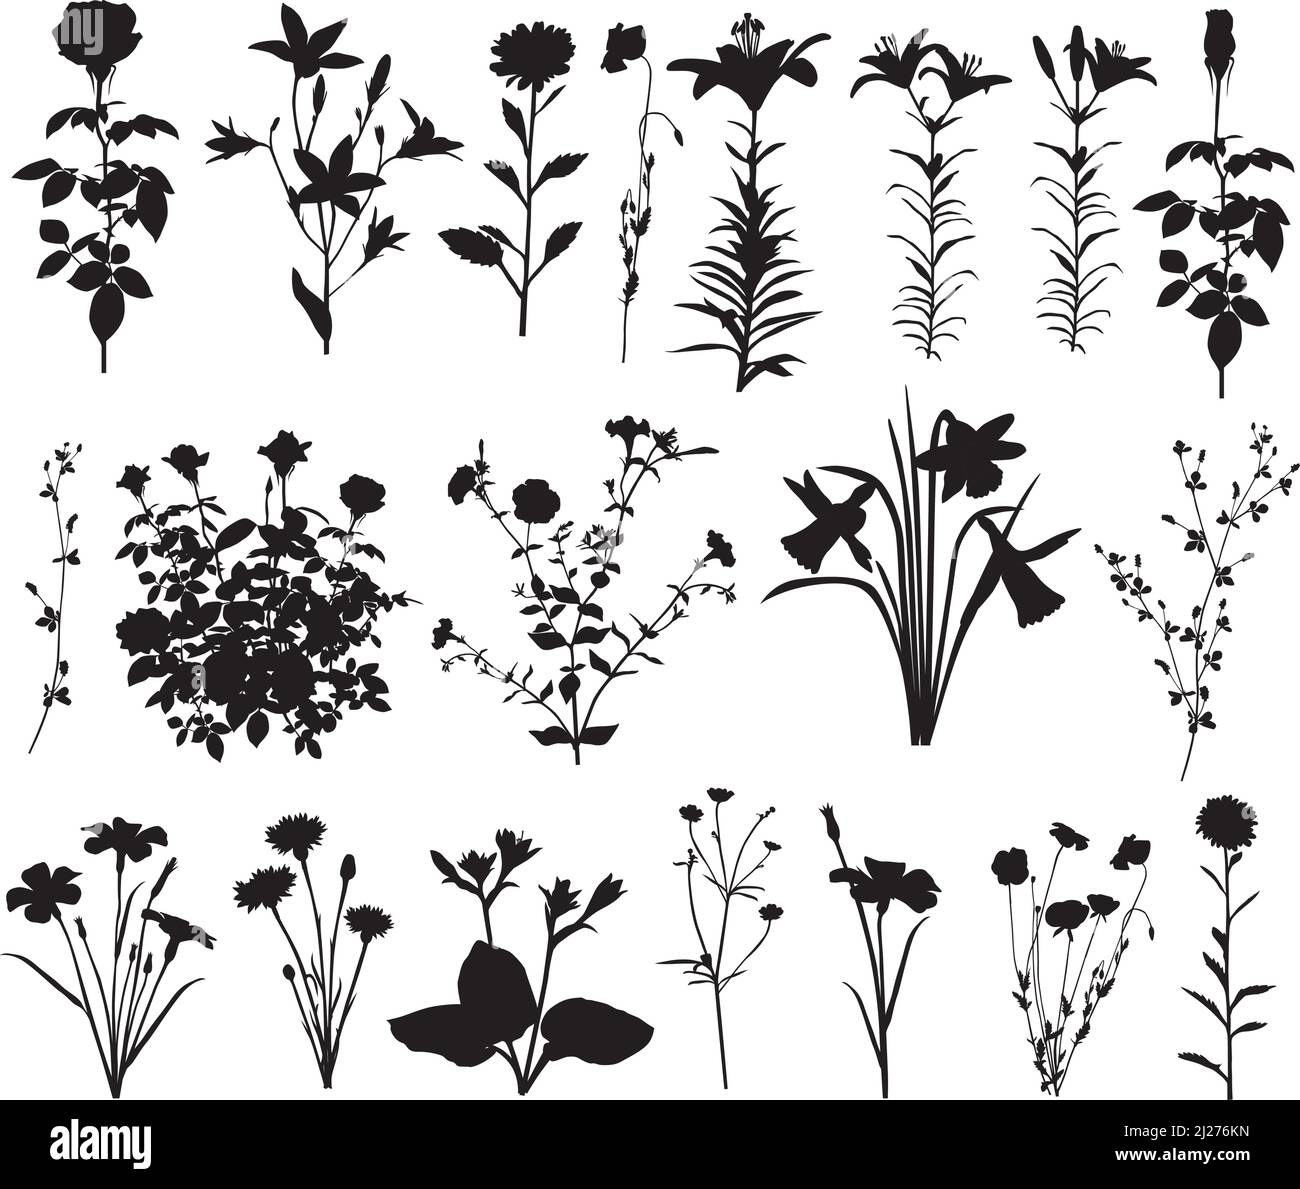 Collection of silhouettes of different species of flowers: rose, lily, narcissus, cornflower, bluebell, poppy, aster, petunia, hosta and others Stock Vector